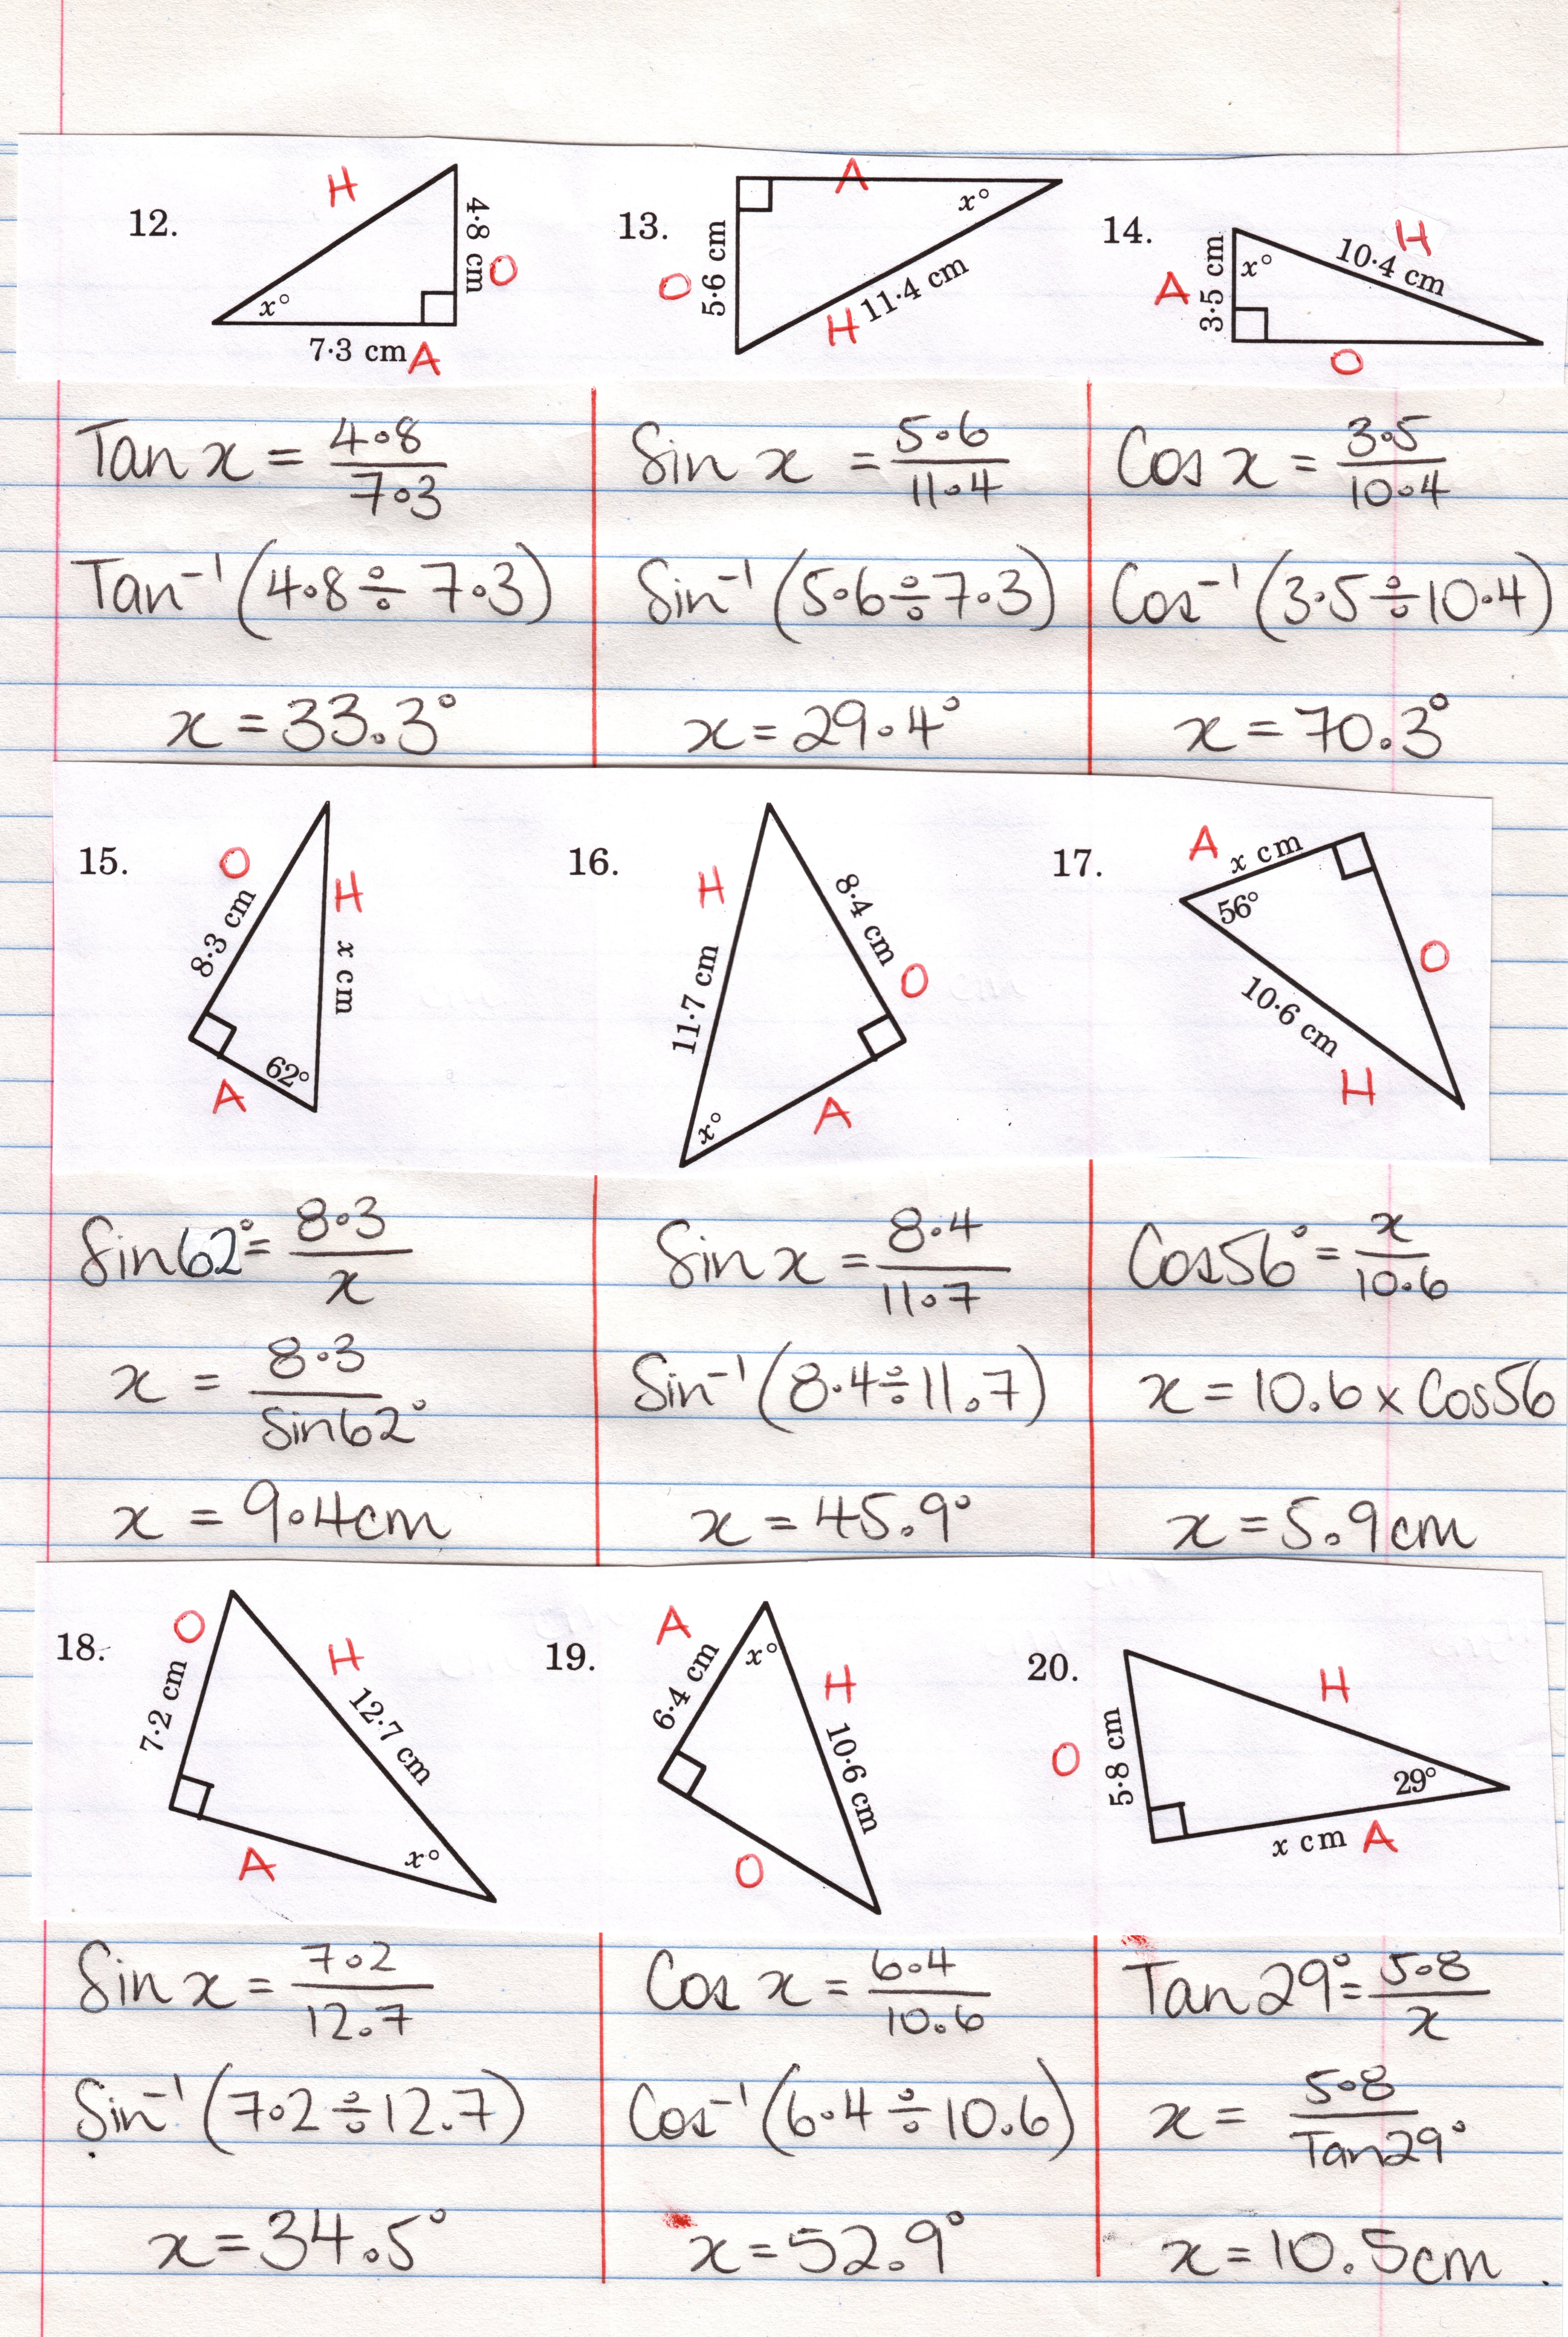 Printables Trigonometry Worksheets With Answers Lemonlilyfestival For Trigonometry Worksheets With Answers